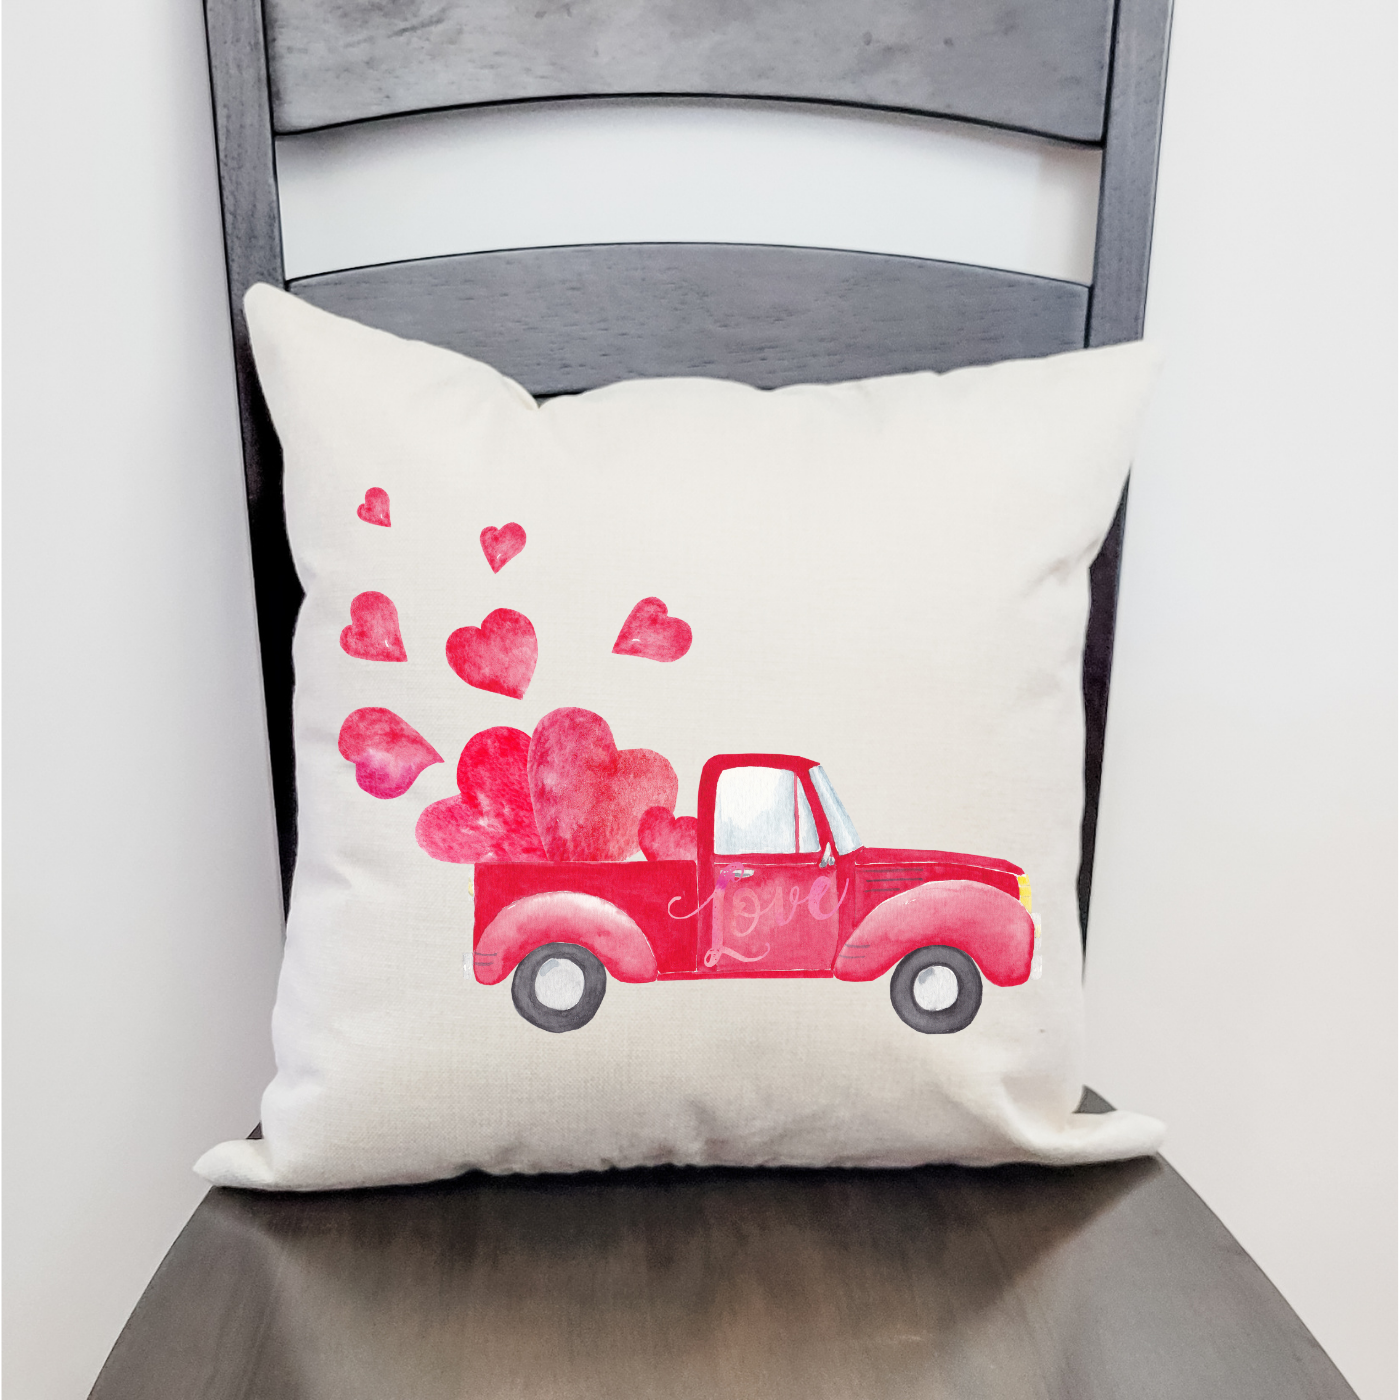 Vintage Love Truck Pillow Cover